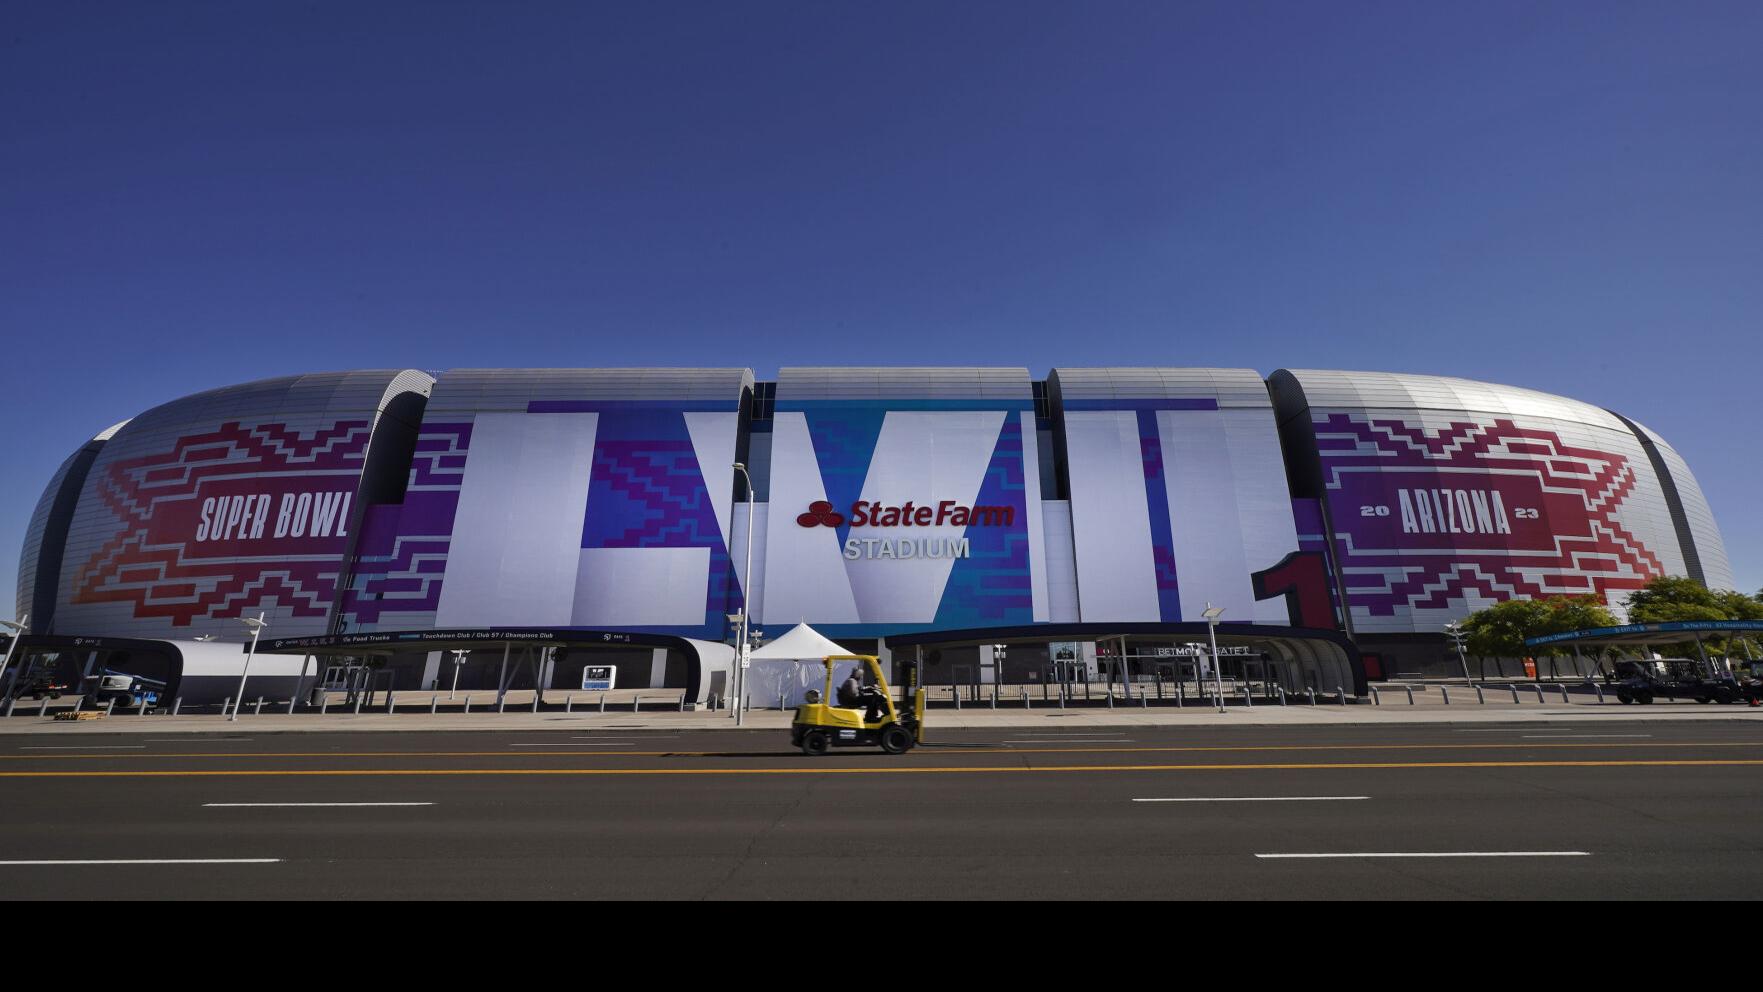 Ohio gaming laws could impact Super Bowl advertising